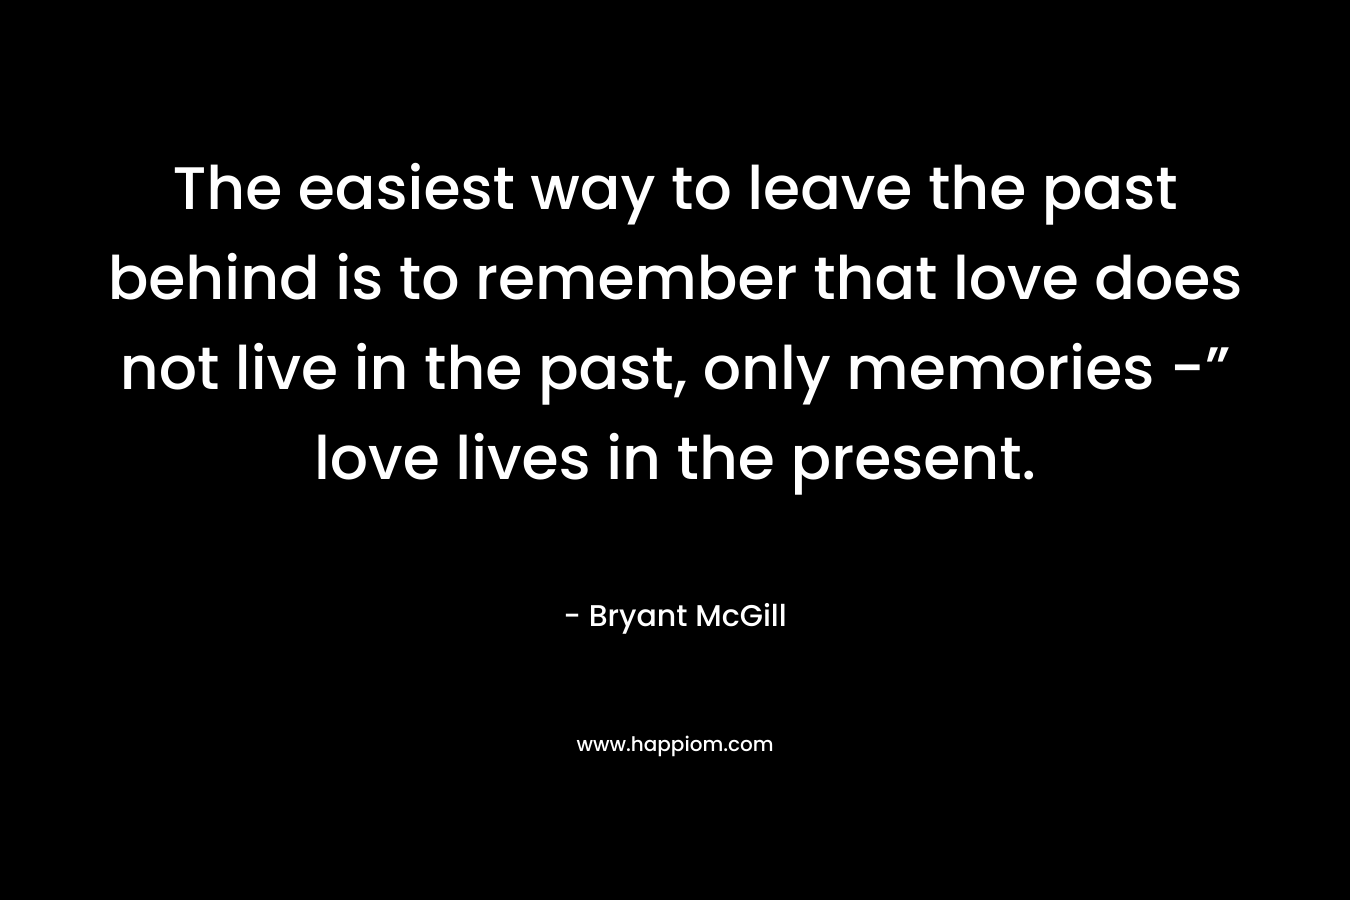 The easiest way to leave the past behind is to remember that love does not live in the past, only memories -” love lives in the present.